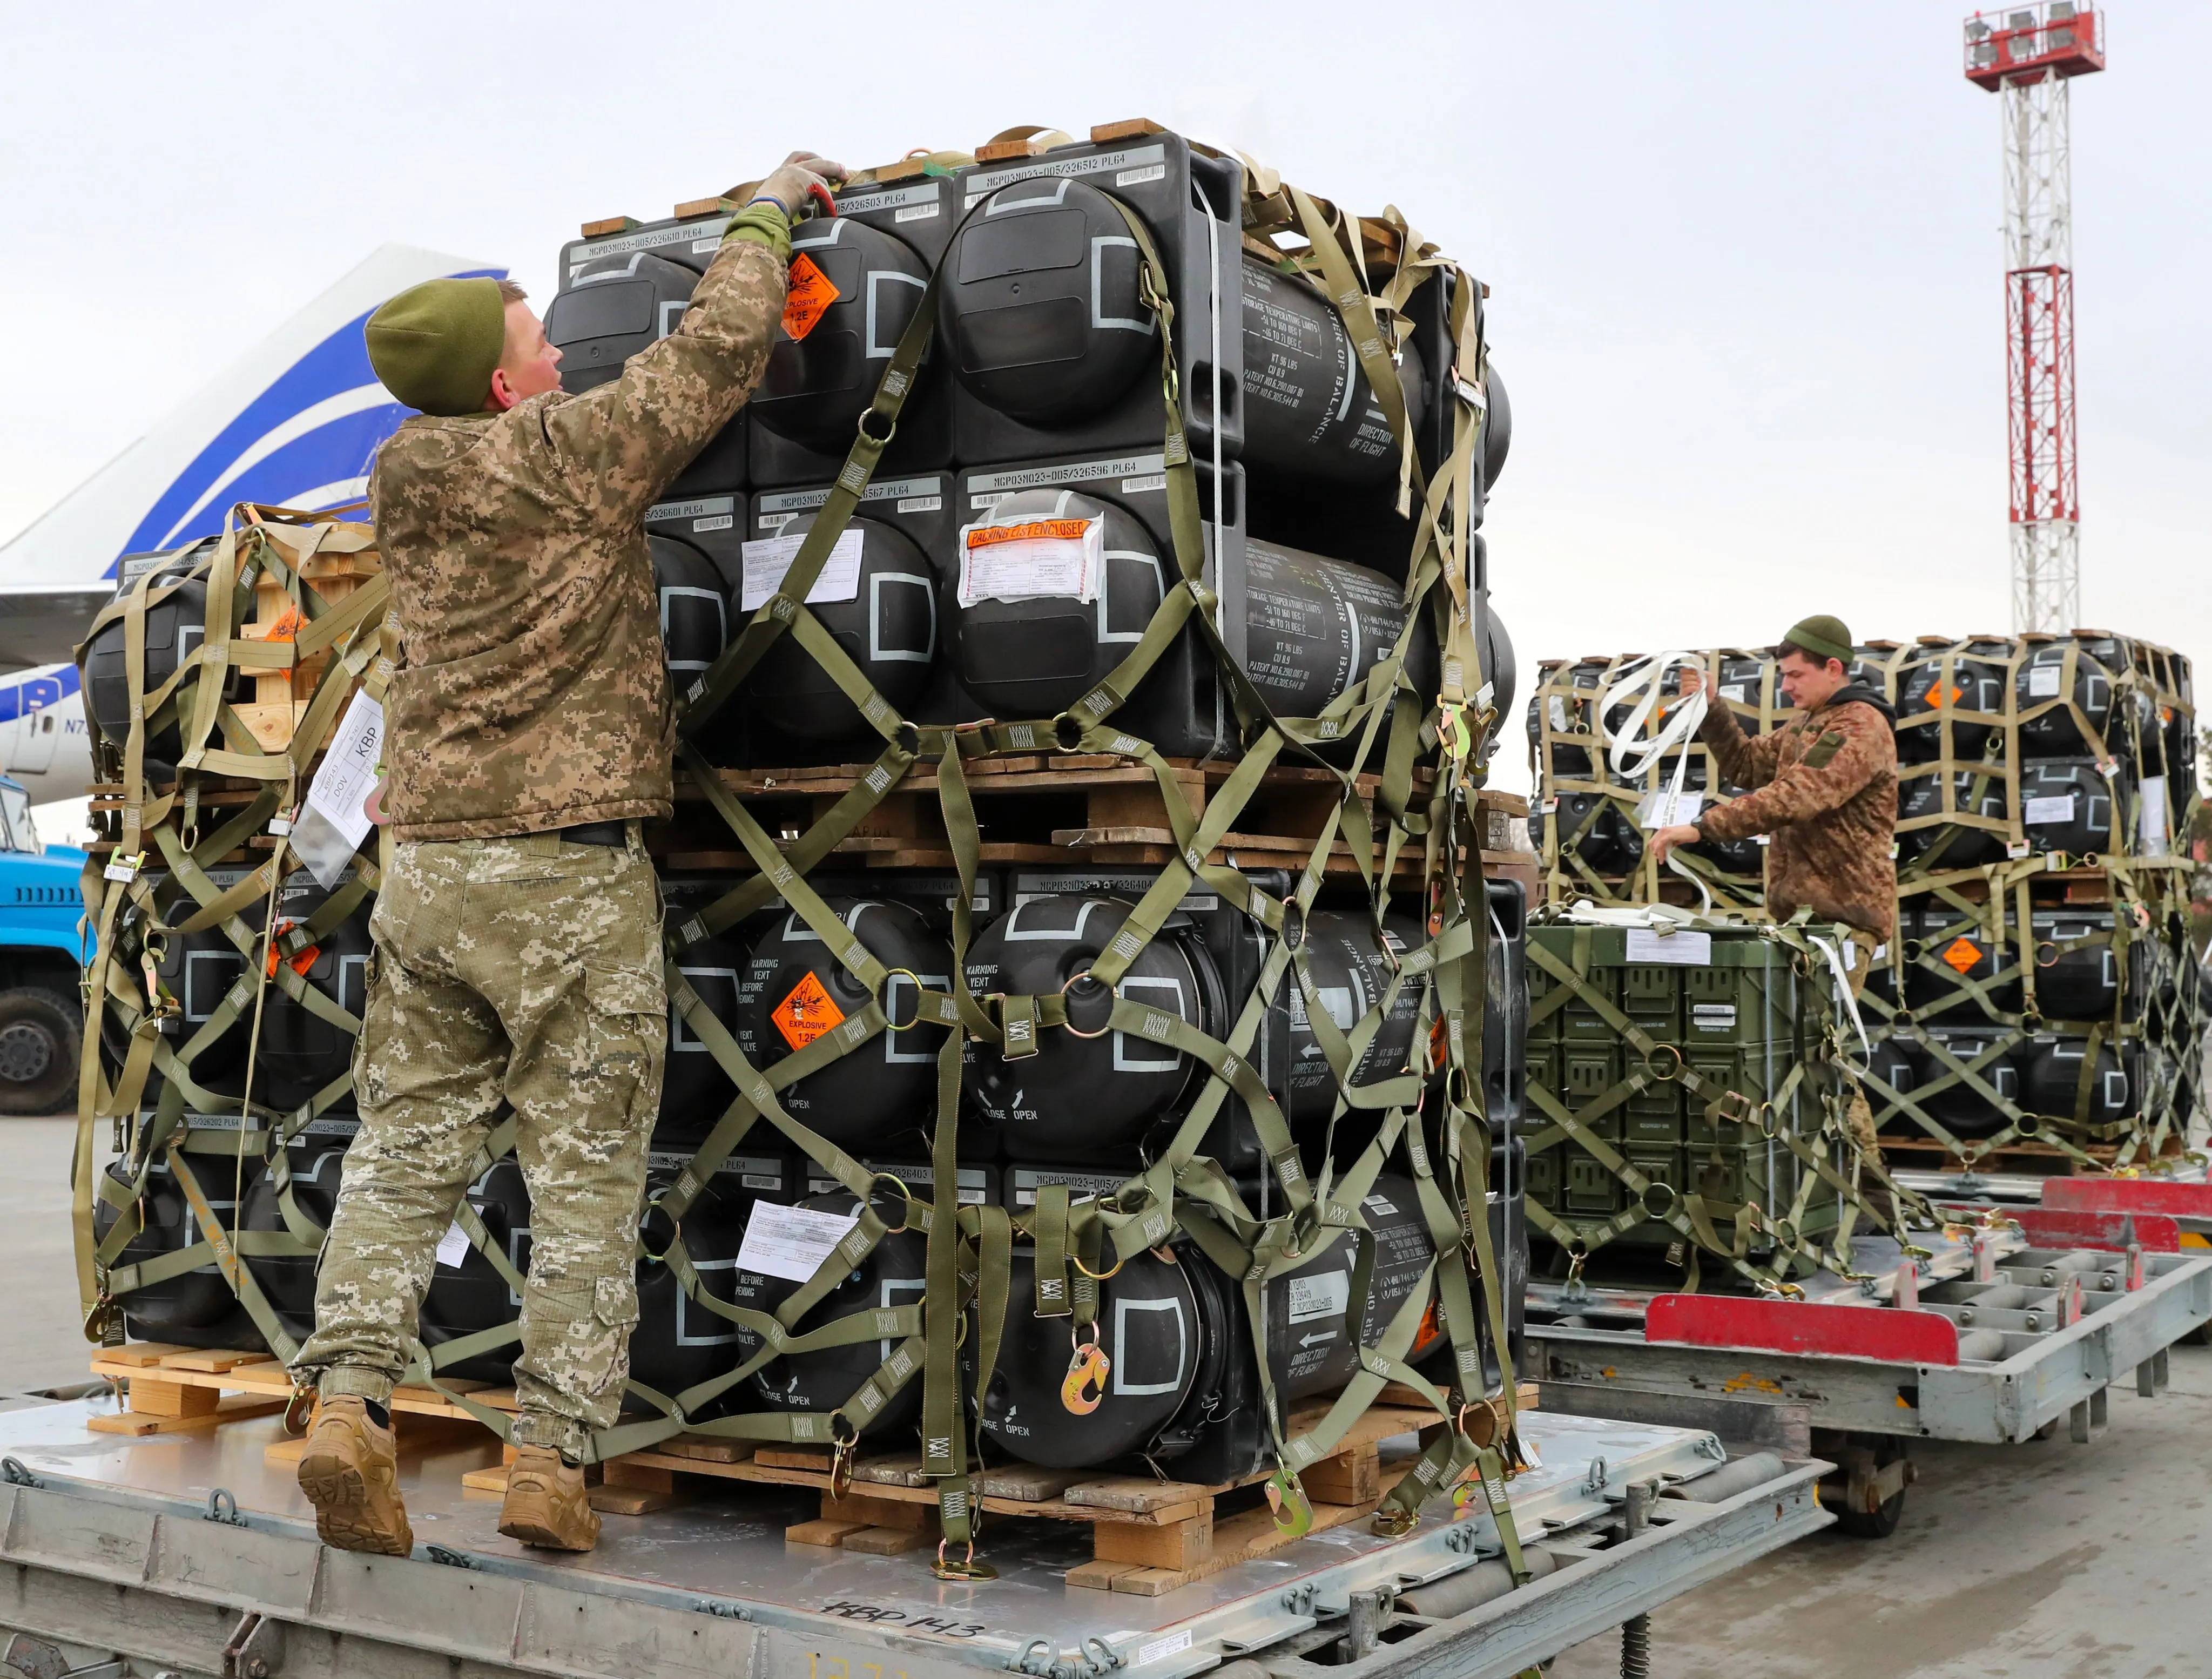 Fifteen flights of military shipment, including another 90 tons of ammunition, Javelin systems and defense aid for Ukraine armed forces, arrives in Ukraine on Feb 11, 2022. U.S and Britain have dispatched reinforcement forces to eastern Europe as Moscow's deployment into Belarus is believed to be its biggest there since the Cold War, with an expected 30,000 combat troops, Spetsnaz special operation forces, fighter jets including SU-35, Iskander dual-capable missiles and S-400 air defense systems, NATO Secretary General Jens Stoltenberg said last Thursday.